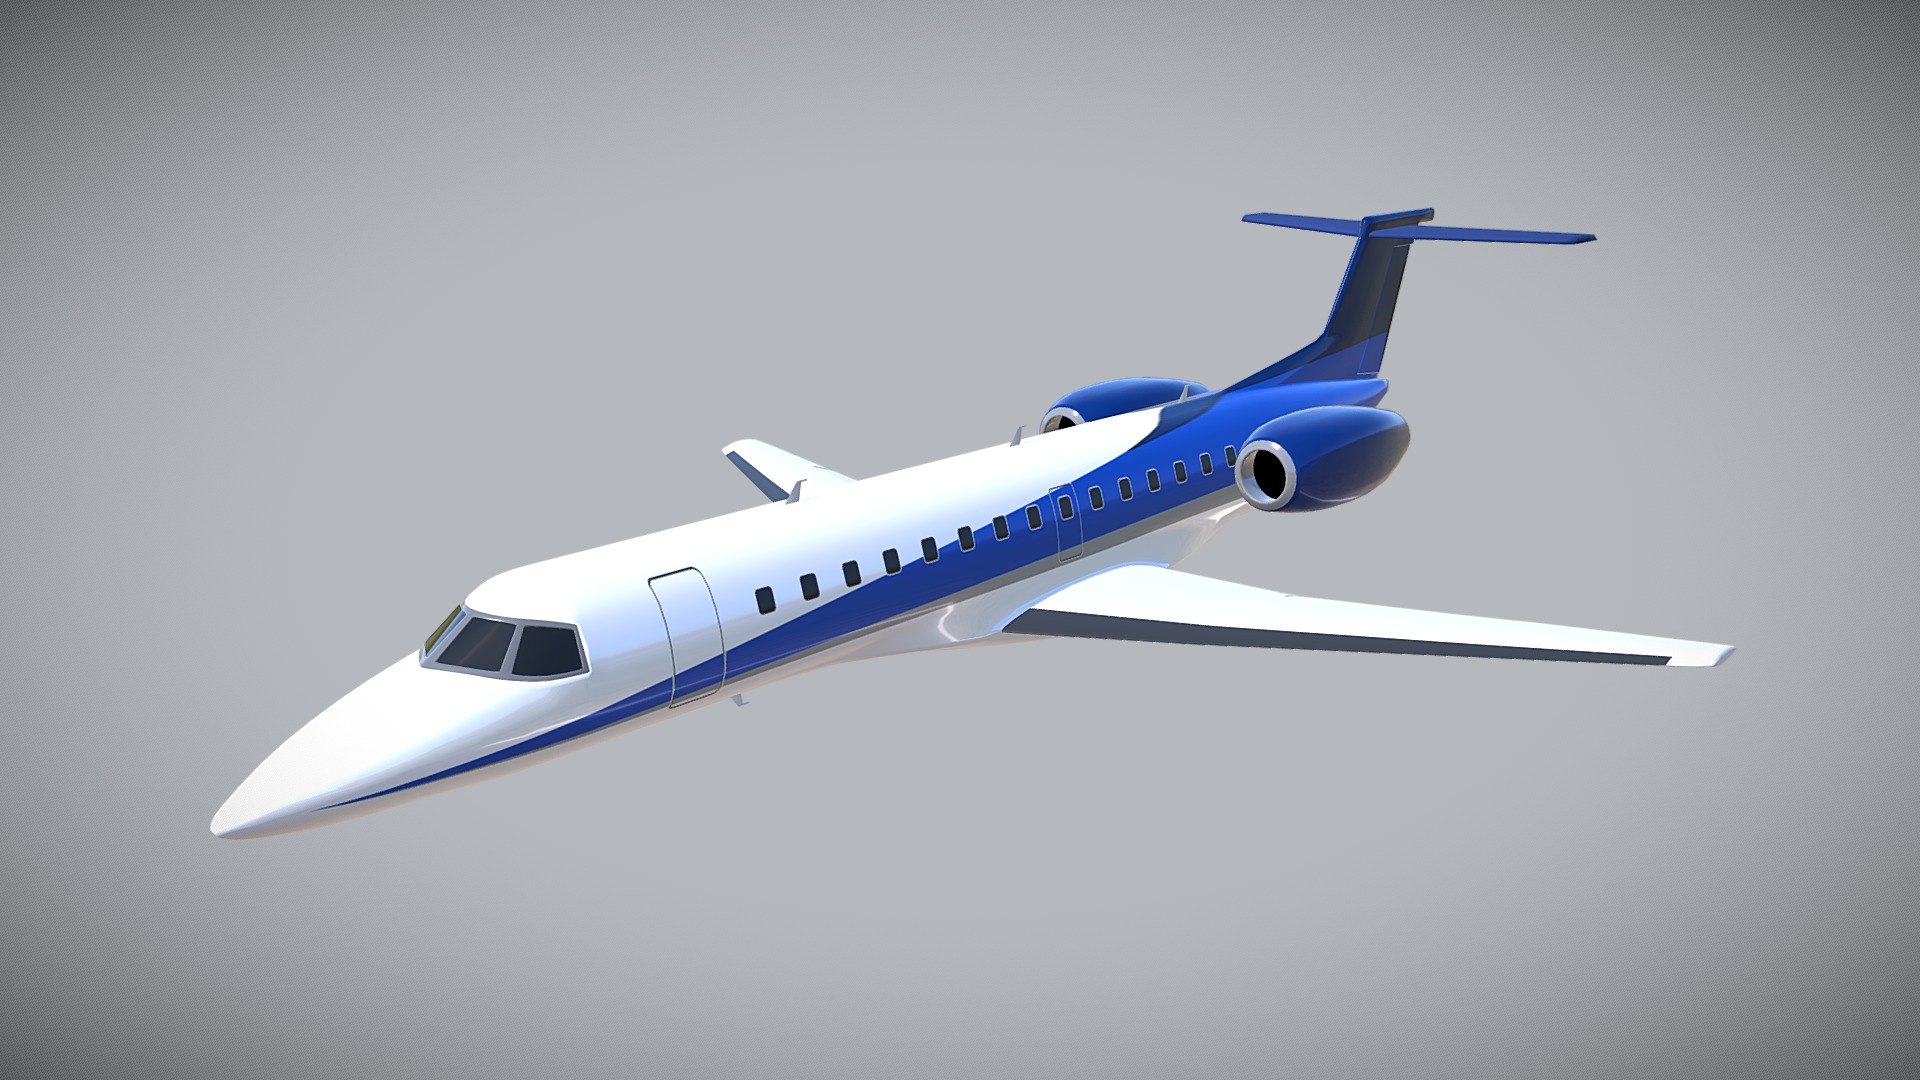 3D model Embraer Erj135 private jet - This is a 3D model of the Embraer Erj135 private jet. The 3D model is about a blue and white airplane in the sky.